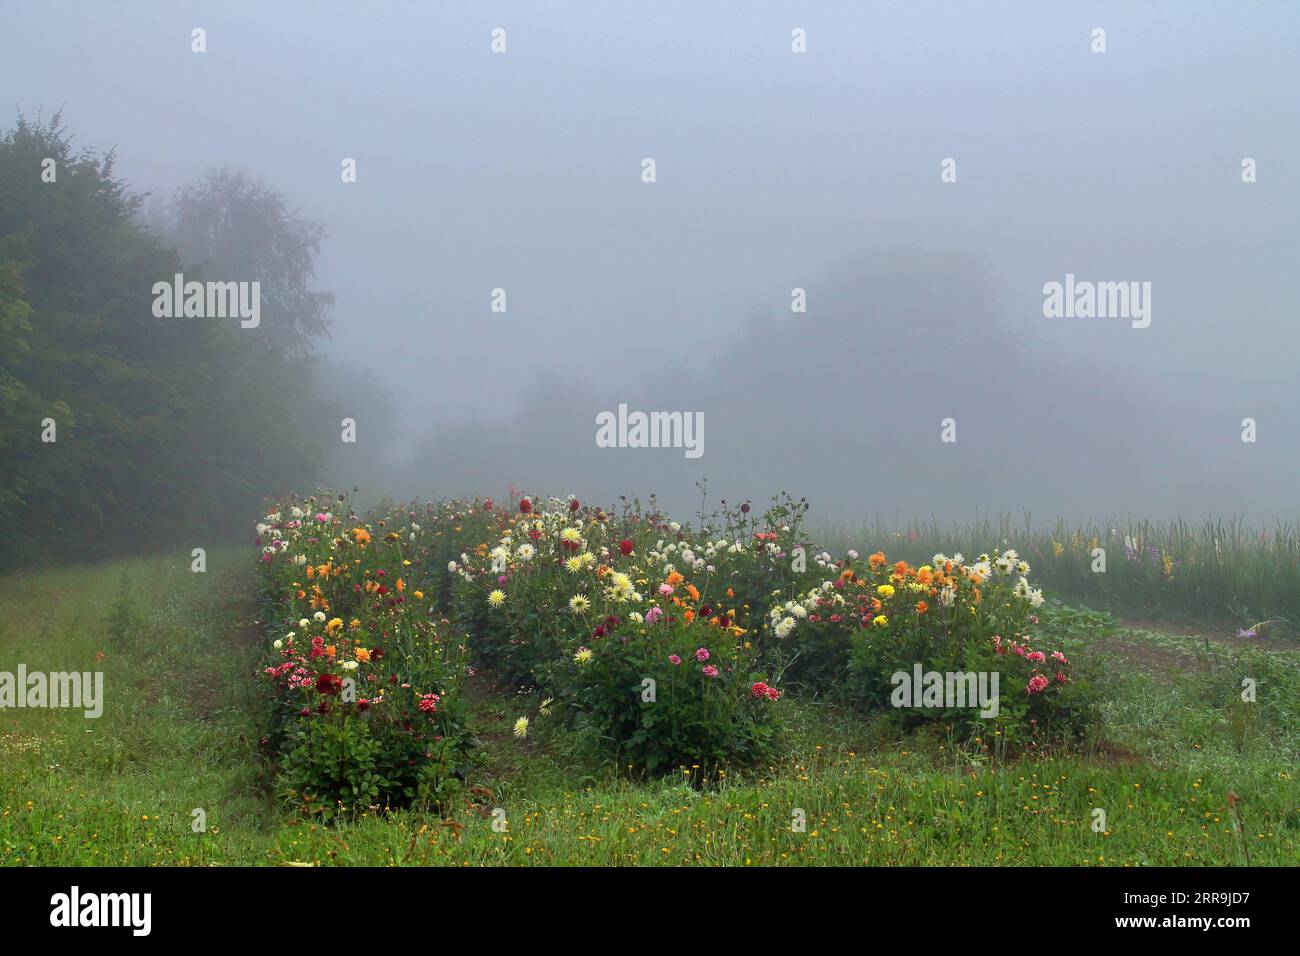 View Of An Agriculturally Used Field With Green Grass Stock Photo